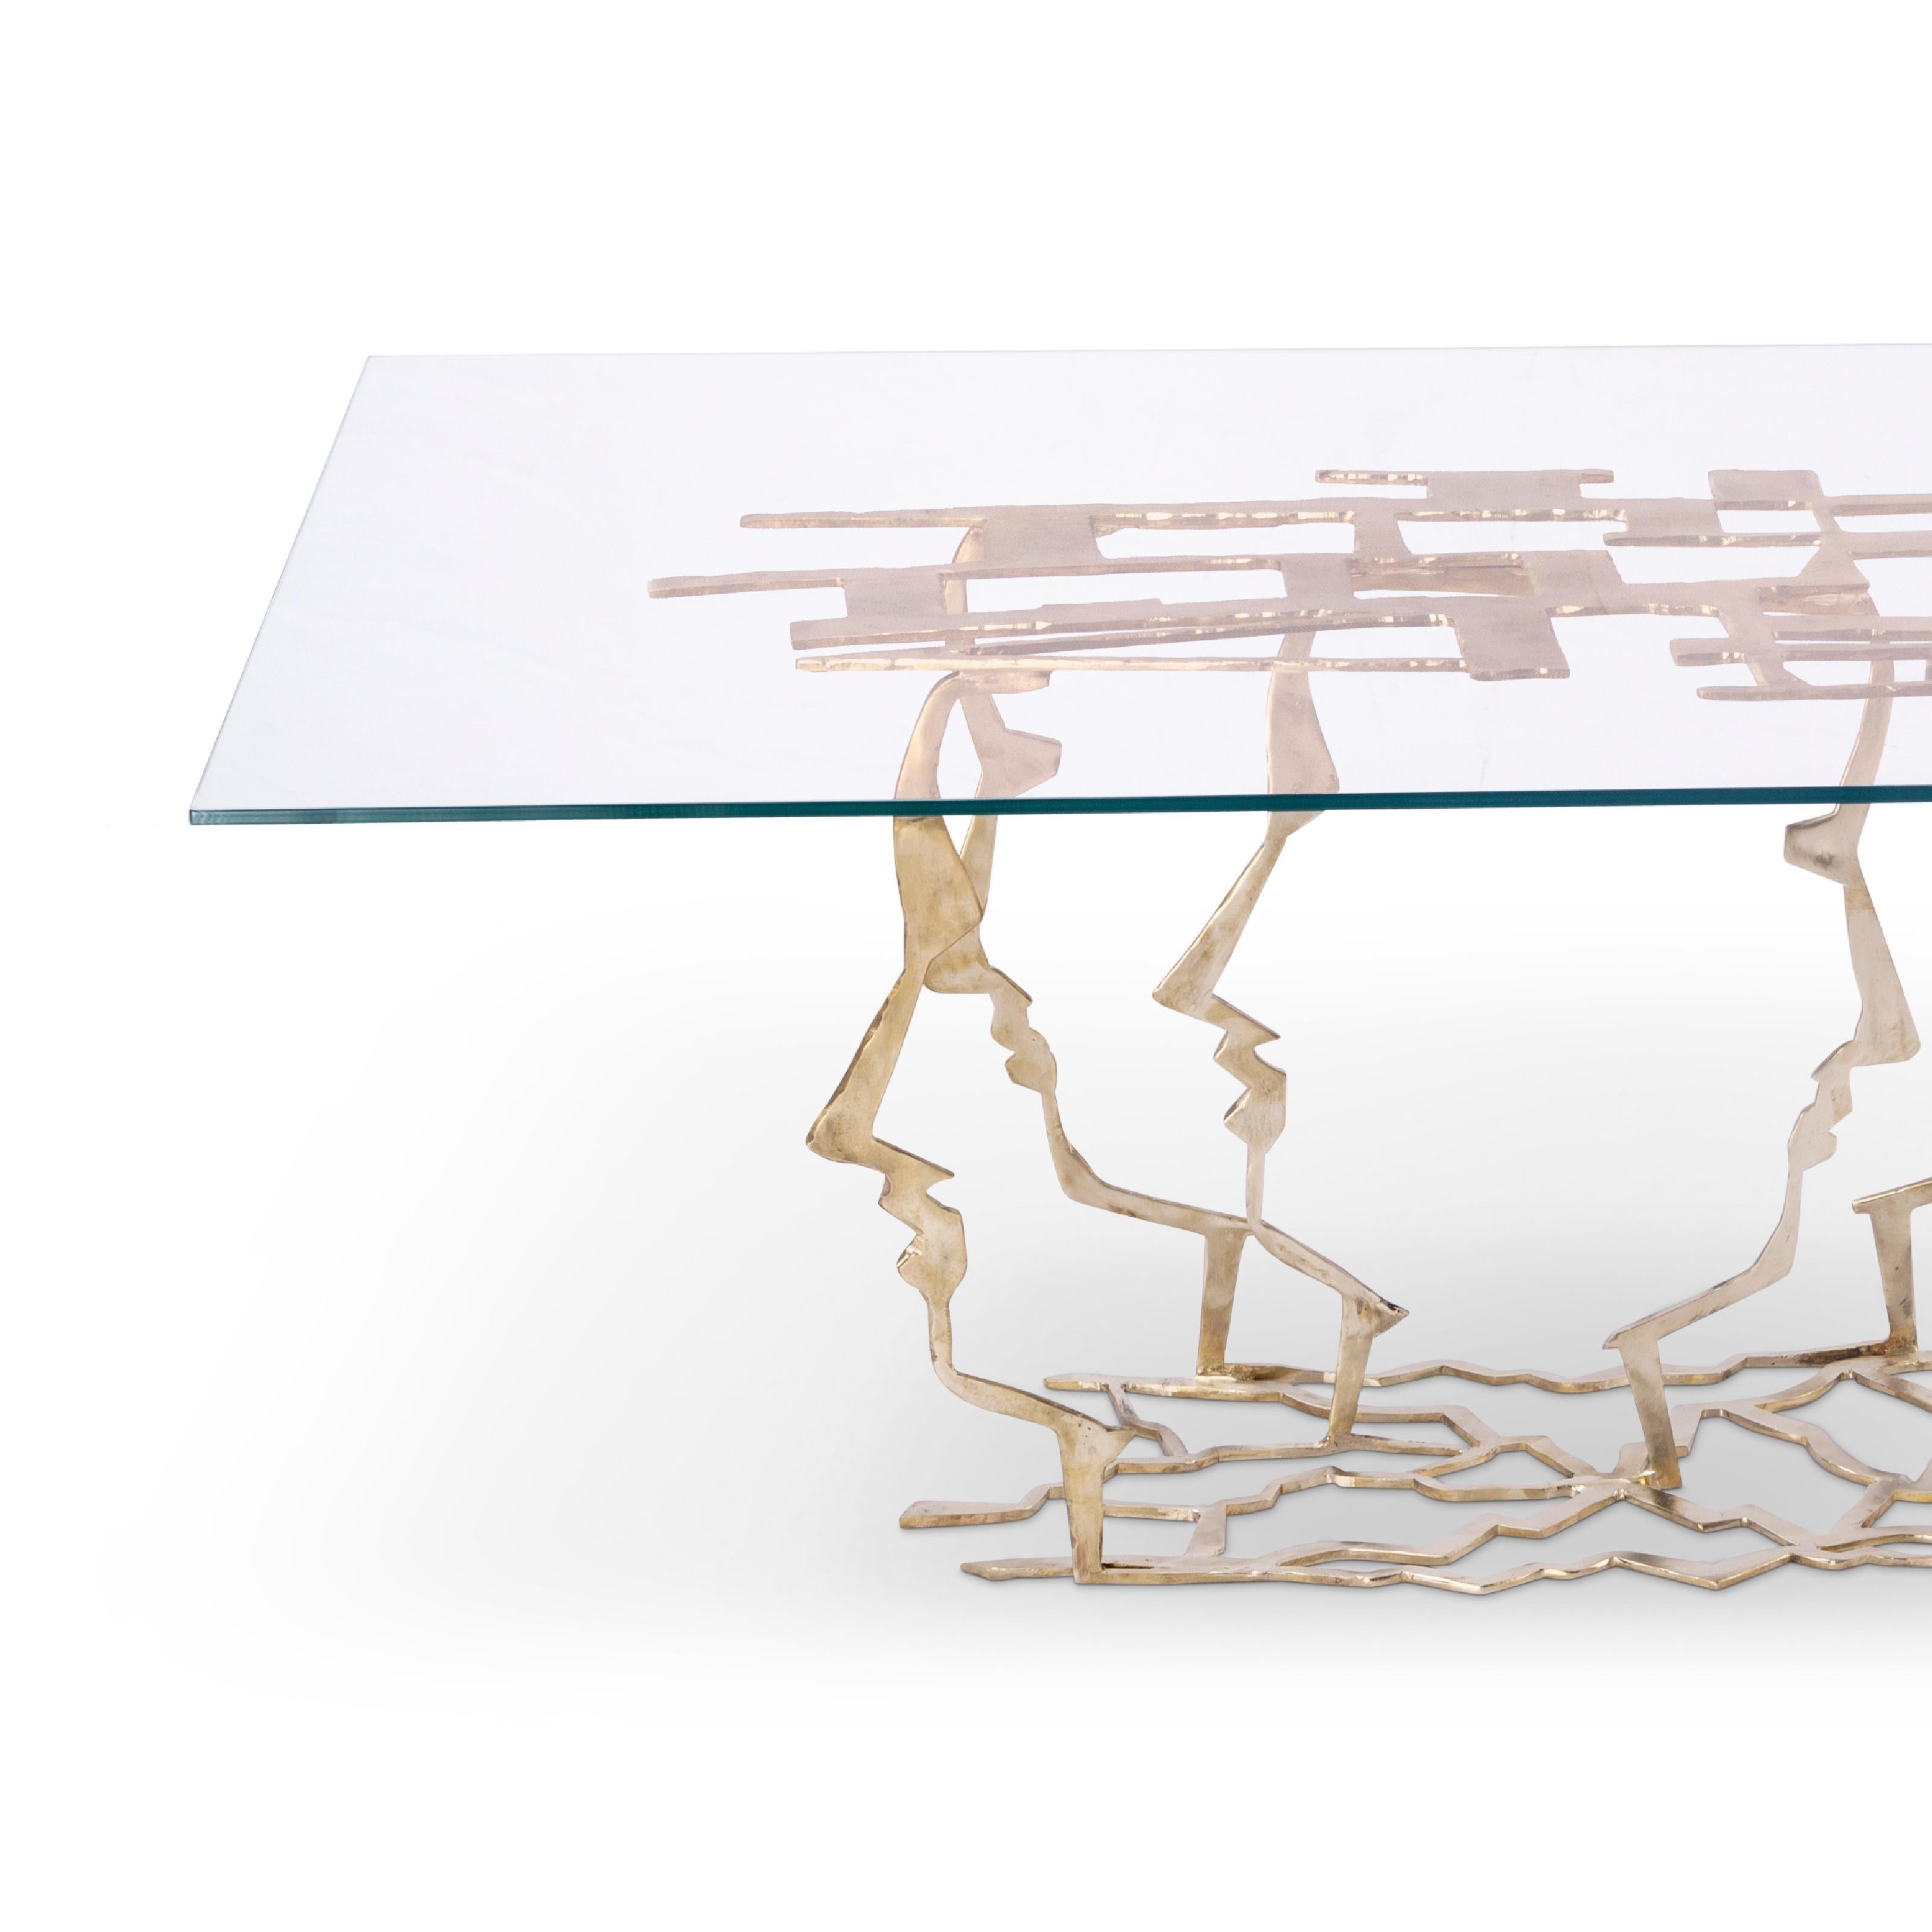 Materials: Brass and glass
Dimensions: 130Wx50Dx135H cm
faces figures brass artistic coffee table